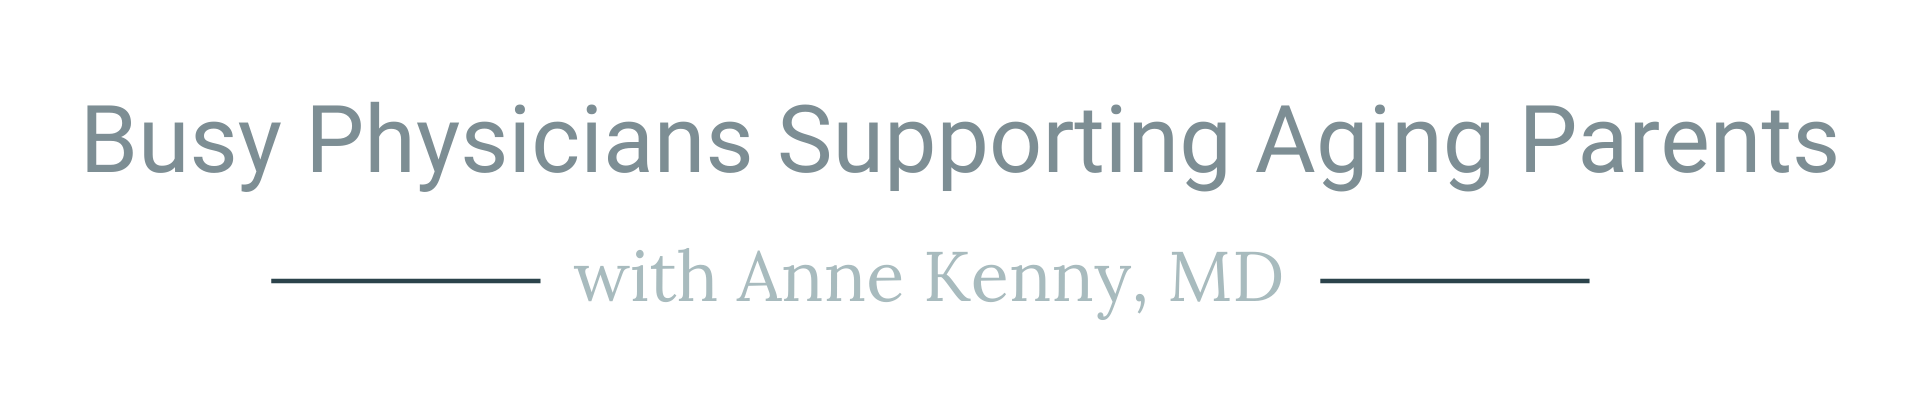 Busy Physicians Supporting Aging Parents with Anne Kenny, MD